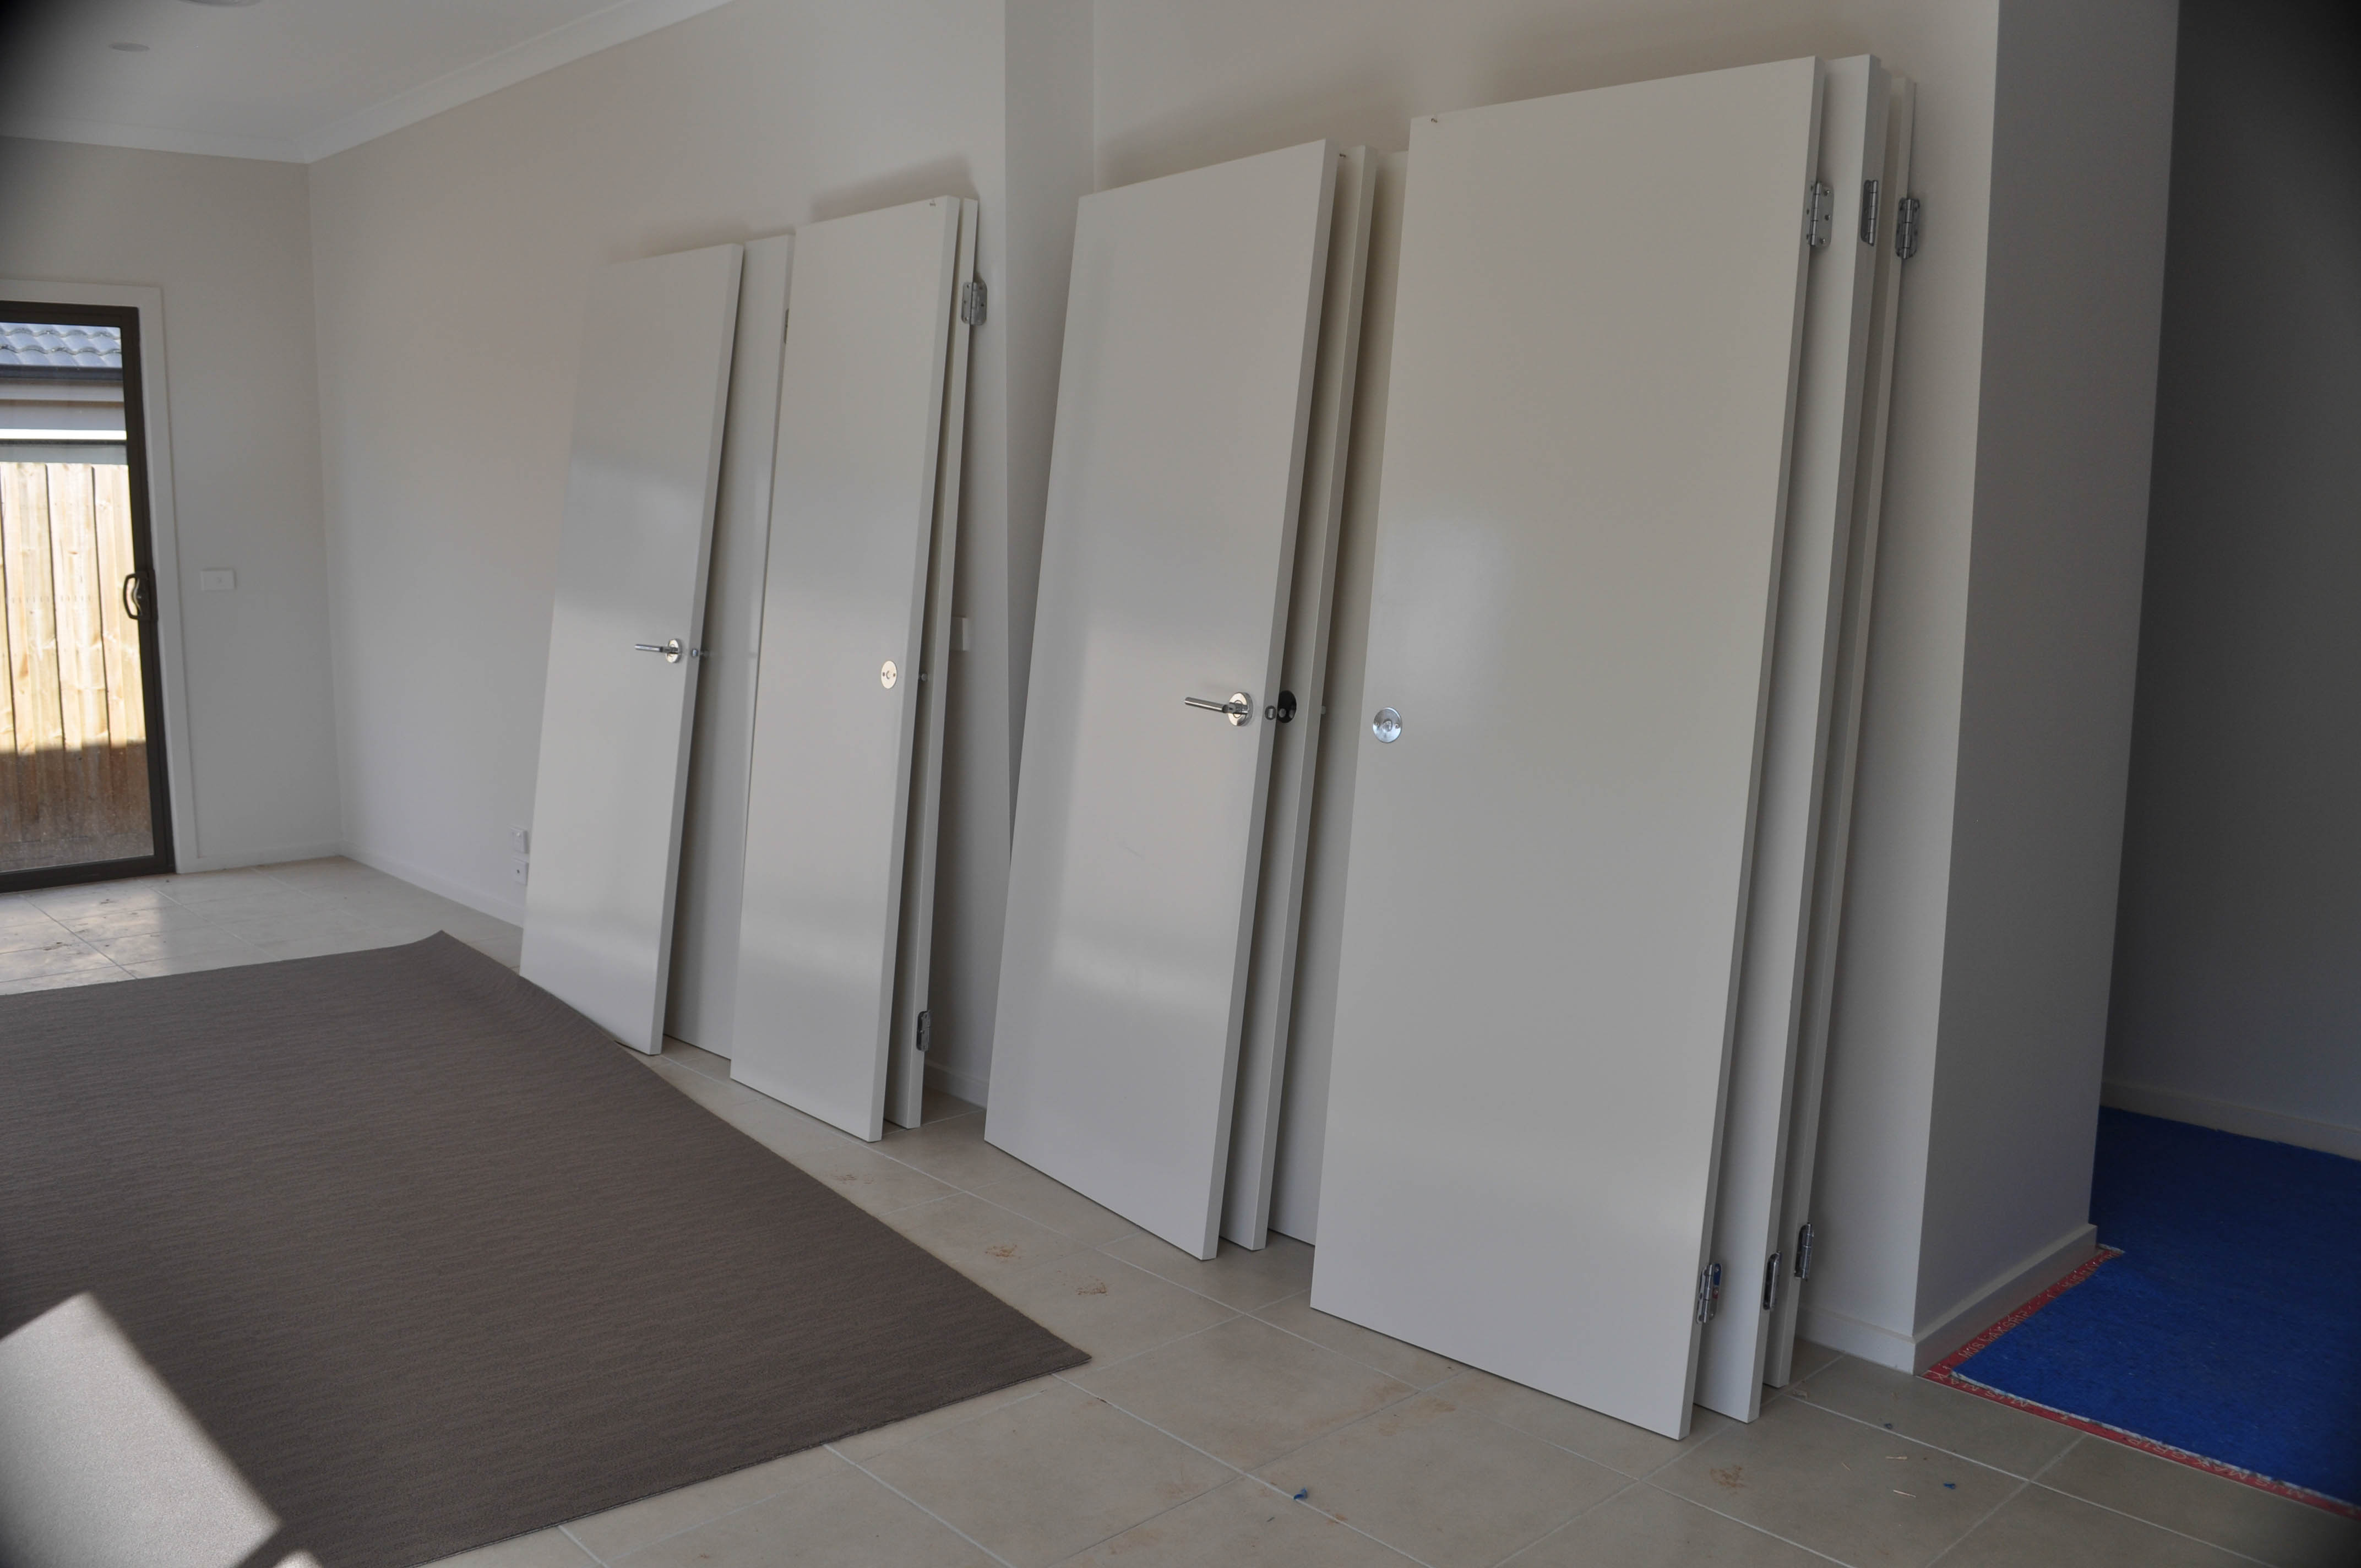 showing a dining room with 8 doors leaning against an upright wall waiting to be rehung upon completion of the carpeet installation process.
The home is in Hoppers Crossing, Melbourne, Victoria 3030, Australia